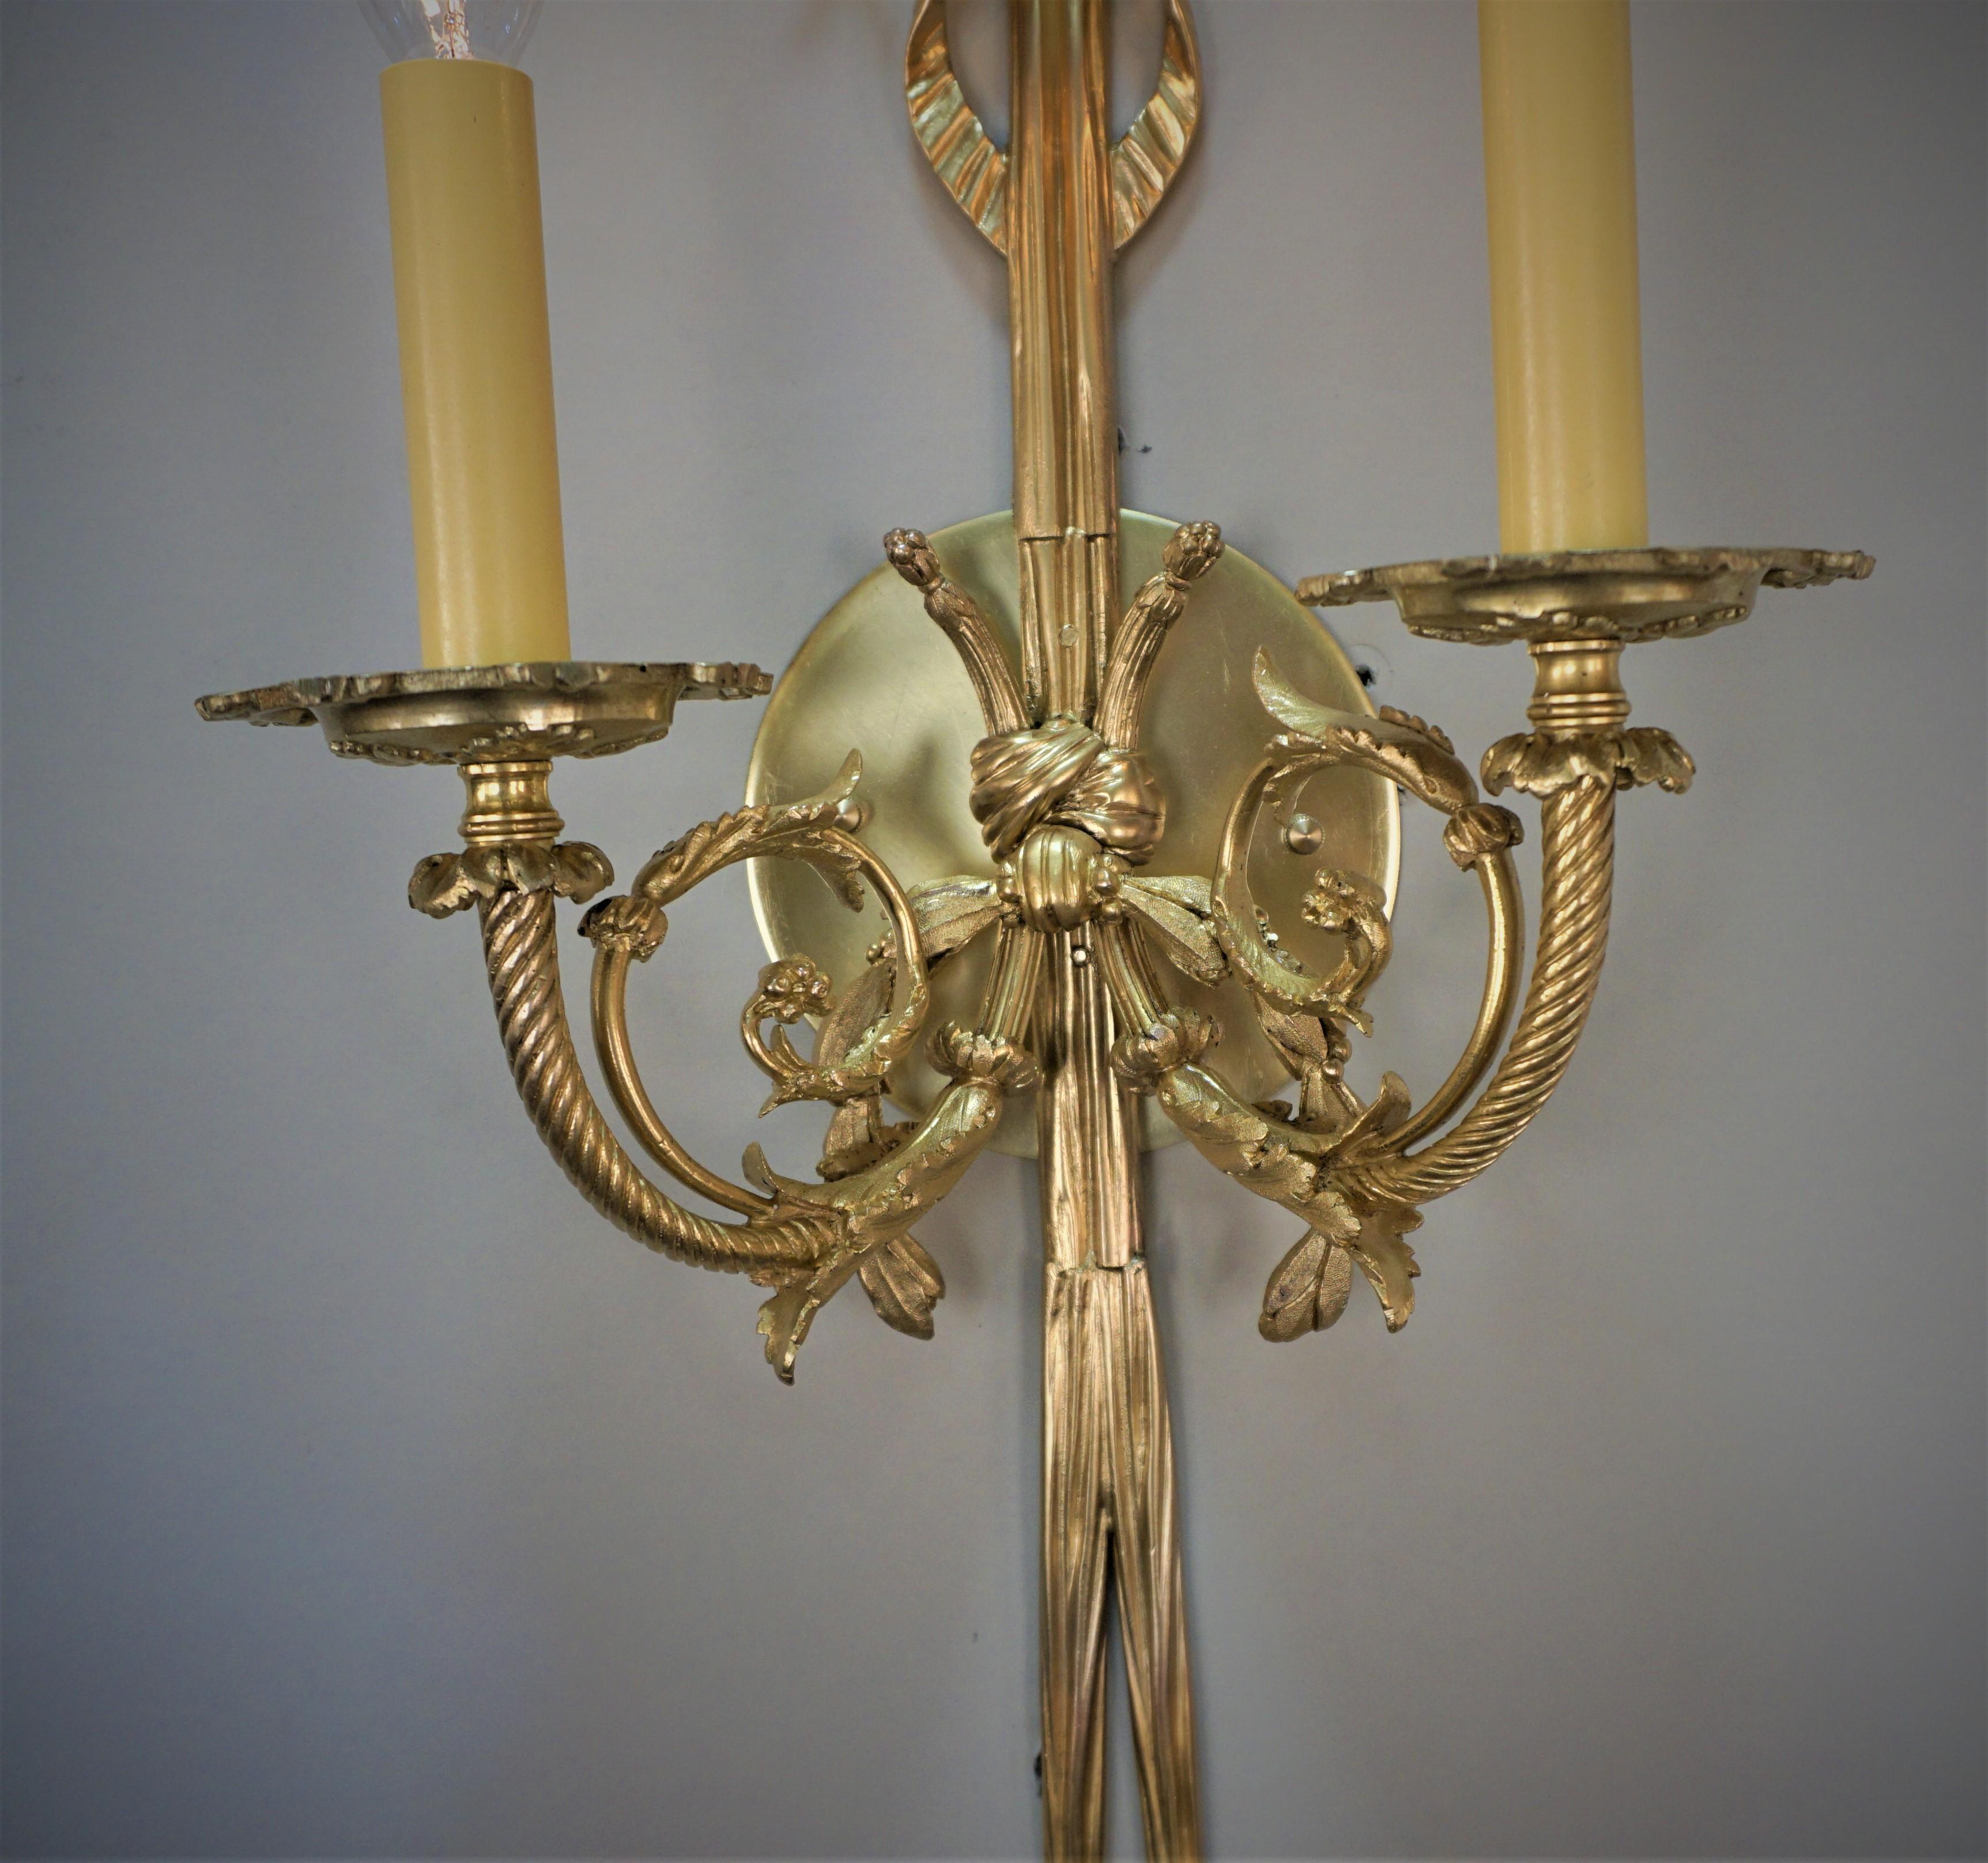 Early 20th Century gilt bronze double arm wall sconces.
Professionally rewired and ready for installation, 60watts max each.